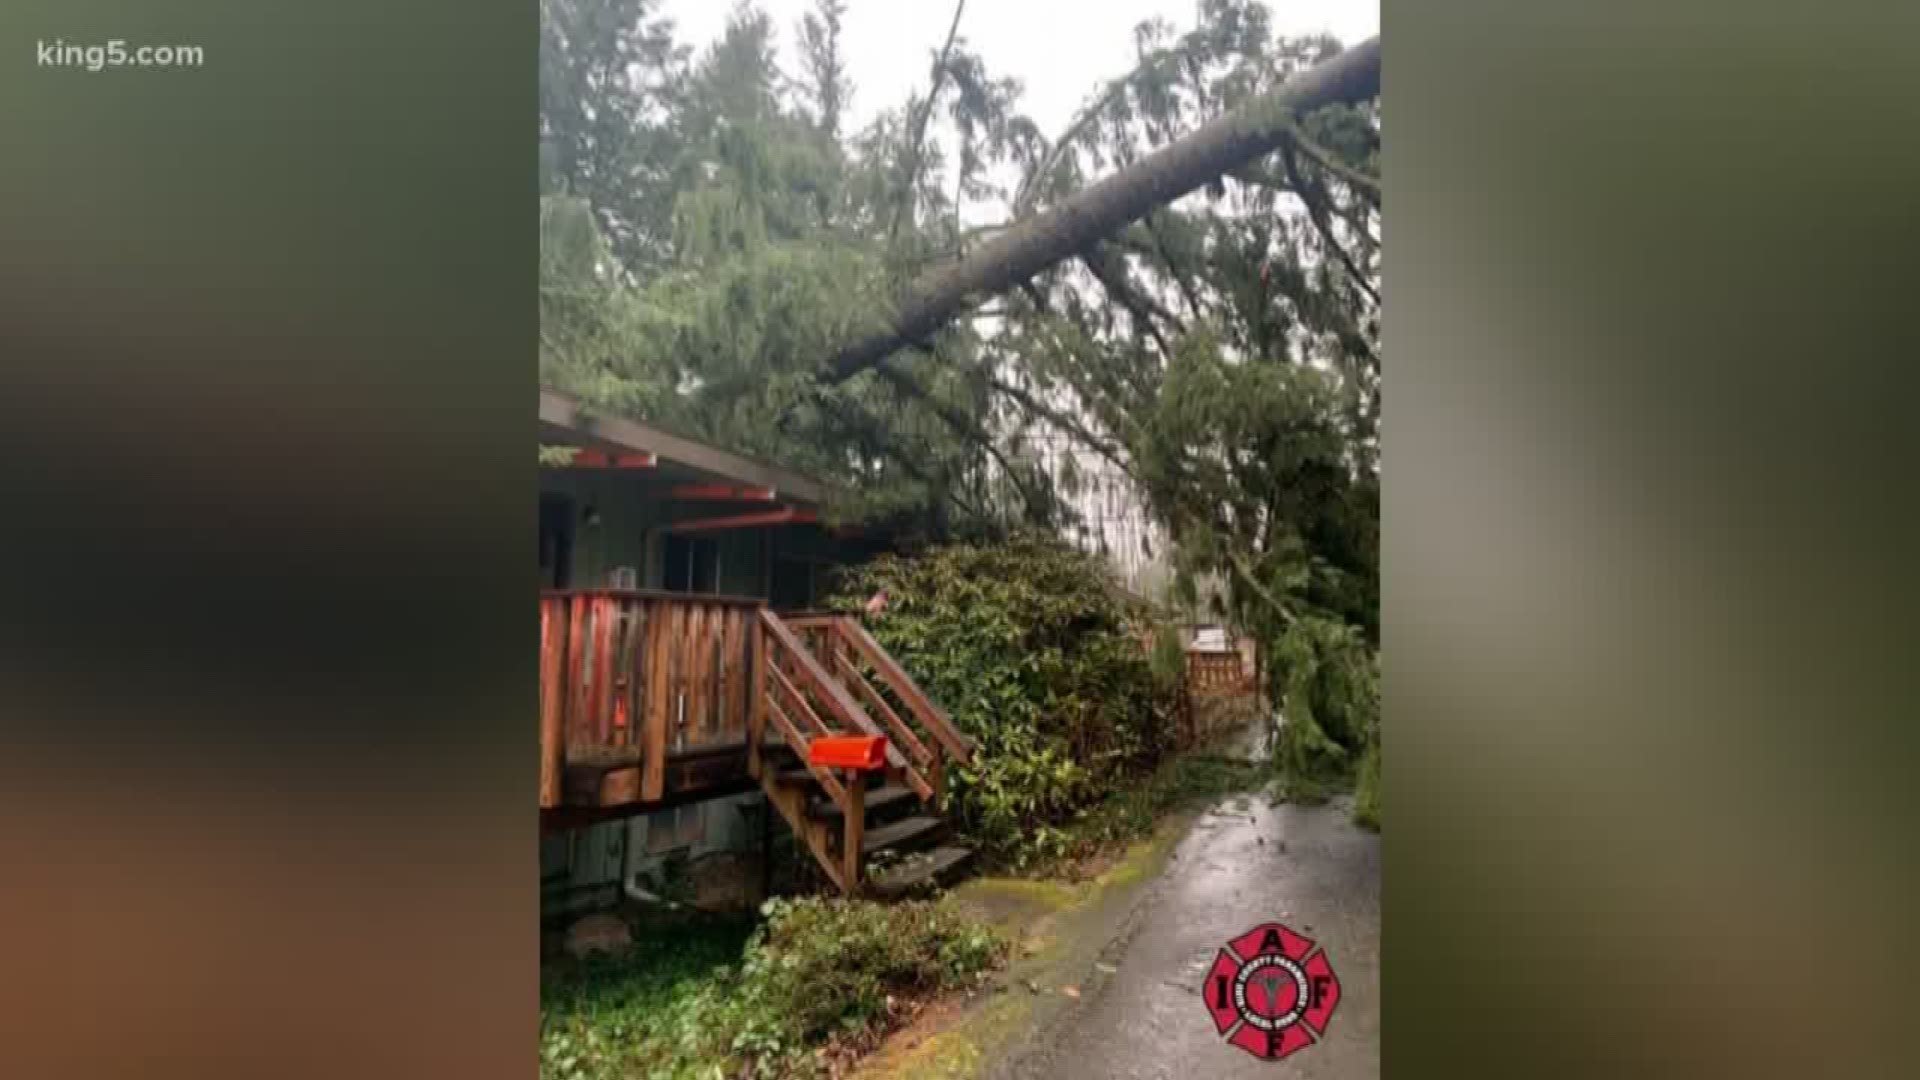 A tree fell on a trail near Redmond, injuring hikers, on Feb. 23, 2020. Another tree fell on apartments in Renton critically injuring one man.